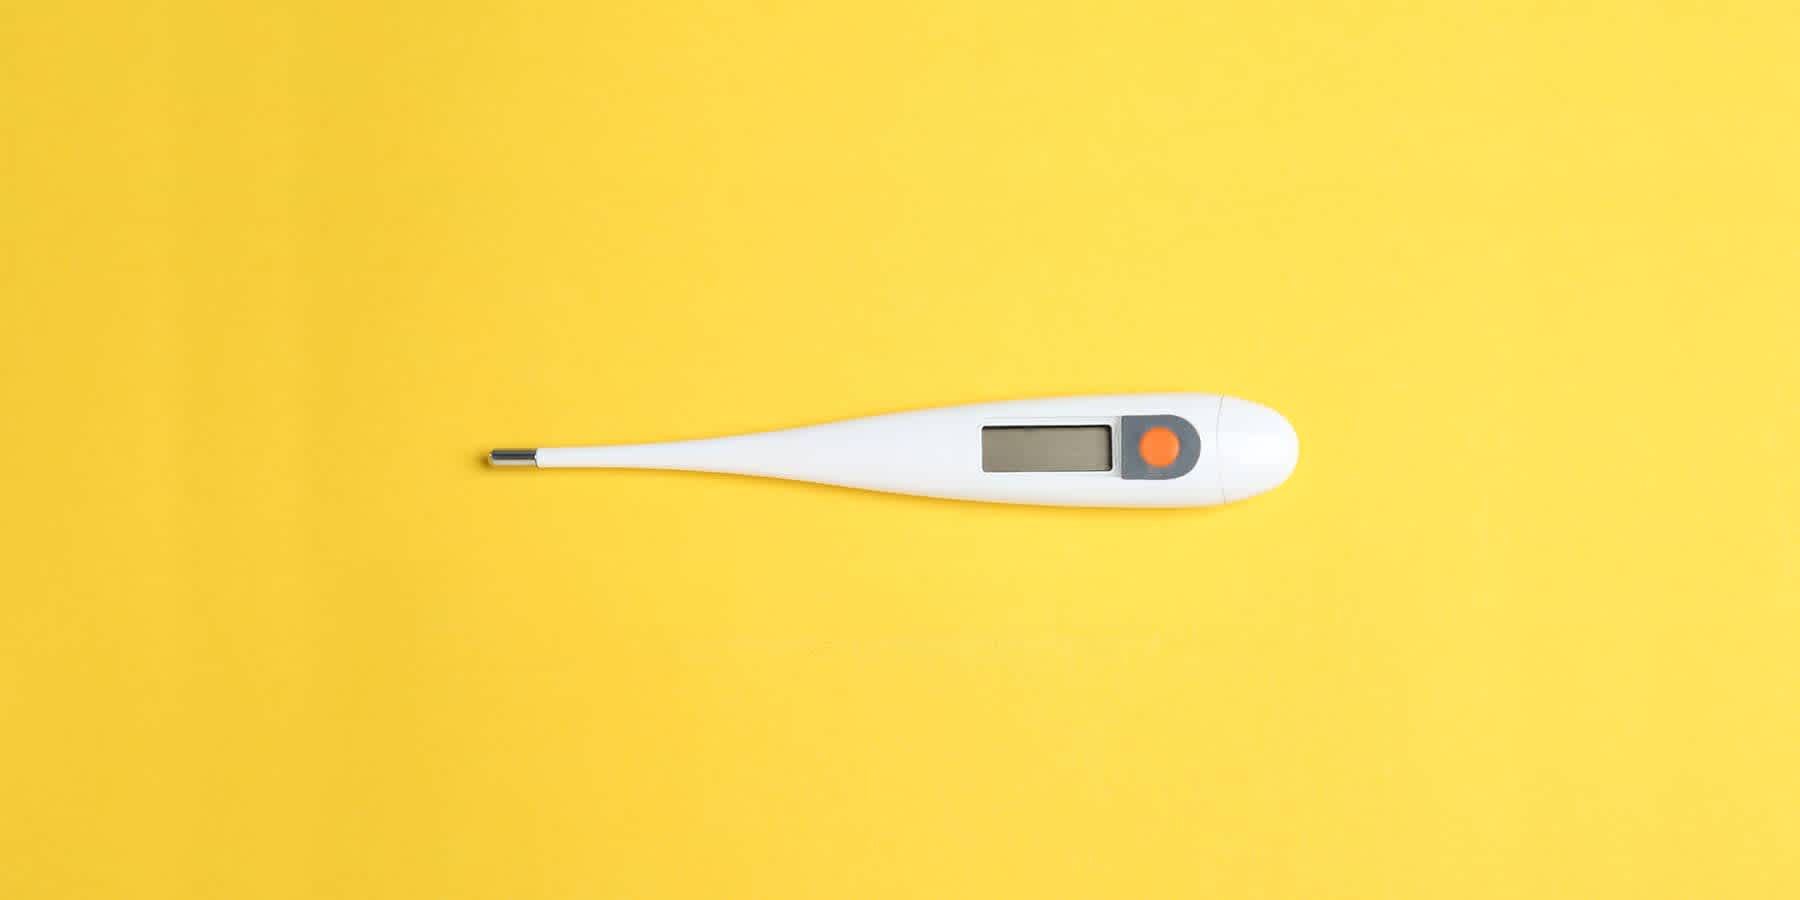 Digital thermometer that can be used to check for fever that may be a warning sign of hepatitis C